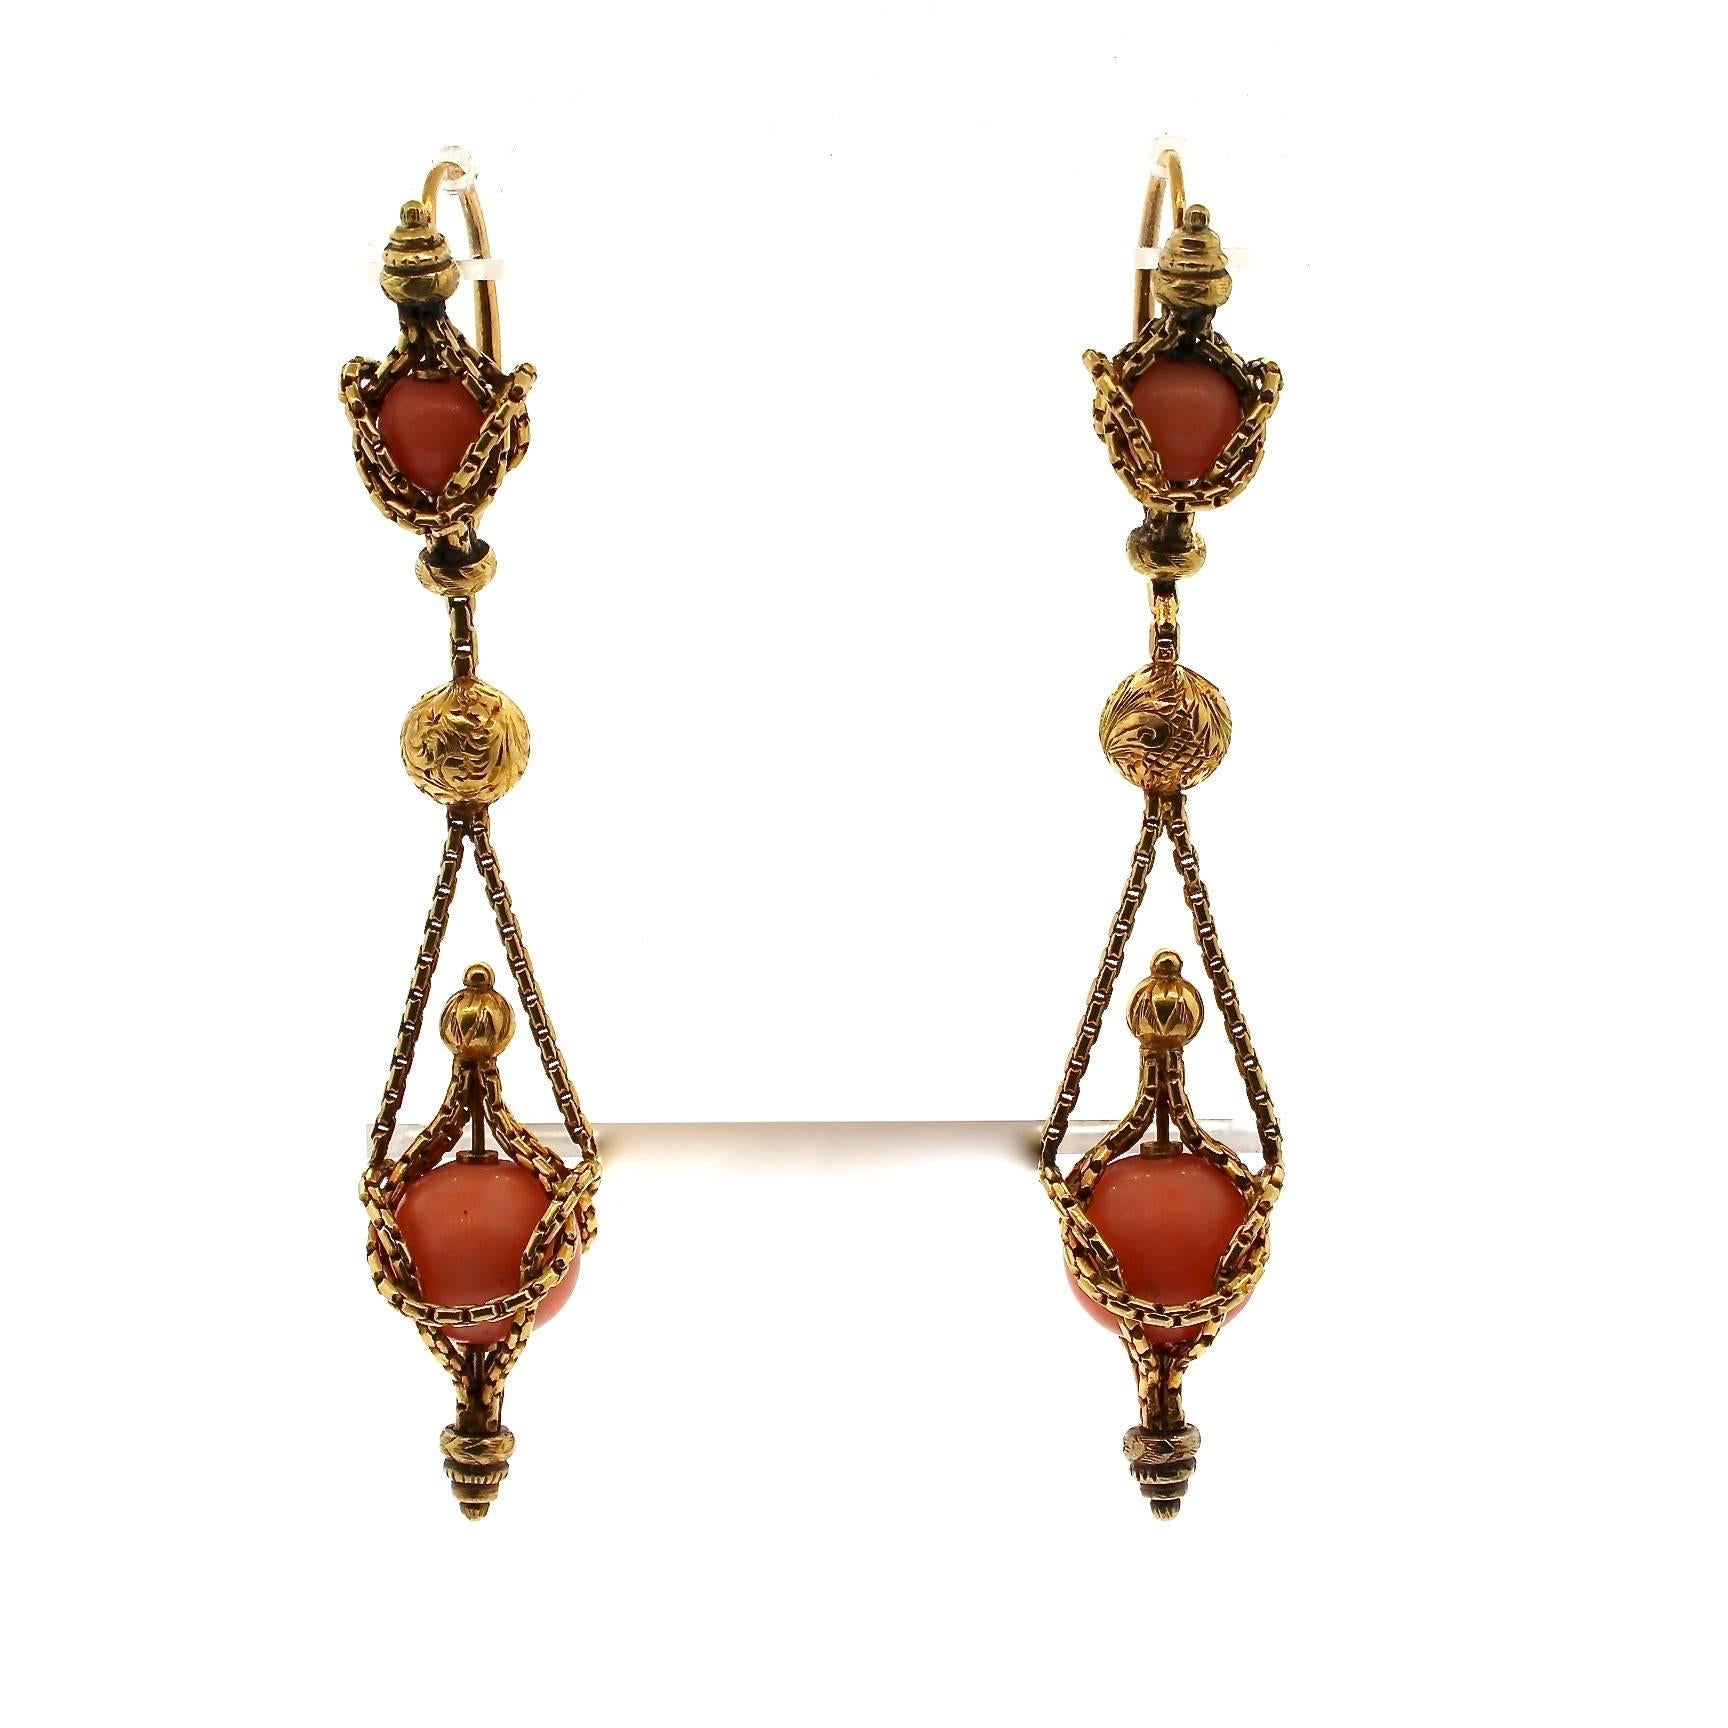 This is a gorgeous dramatic pair of Victorian Etruscan Revival coral dangling earrings.  The earring is composed almost like hanging urns, but with fine gold cord suspending coral beads.  The earring is made in 18k gold and has a front to back